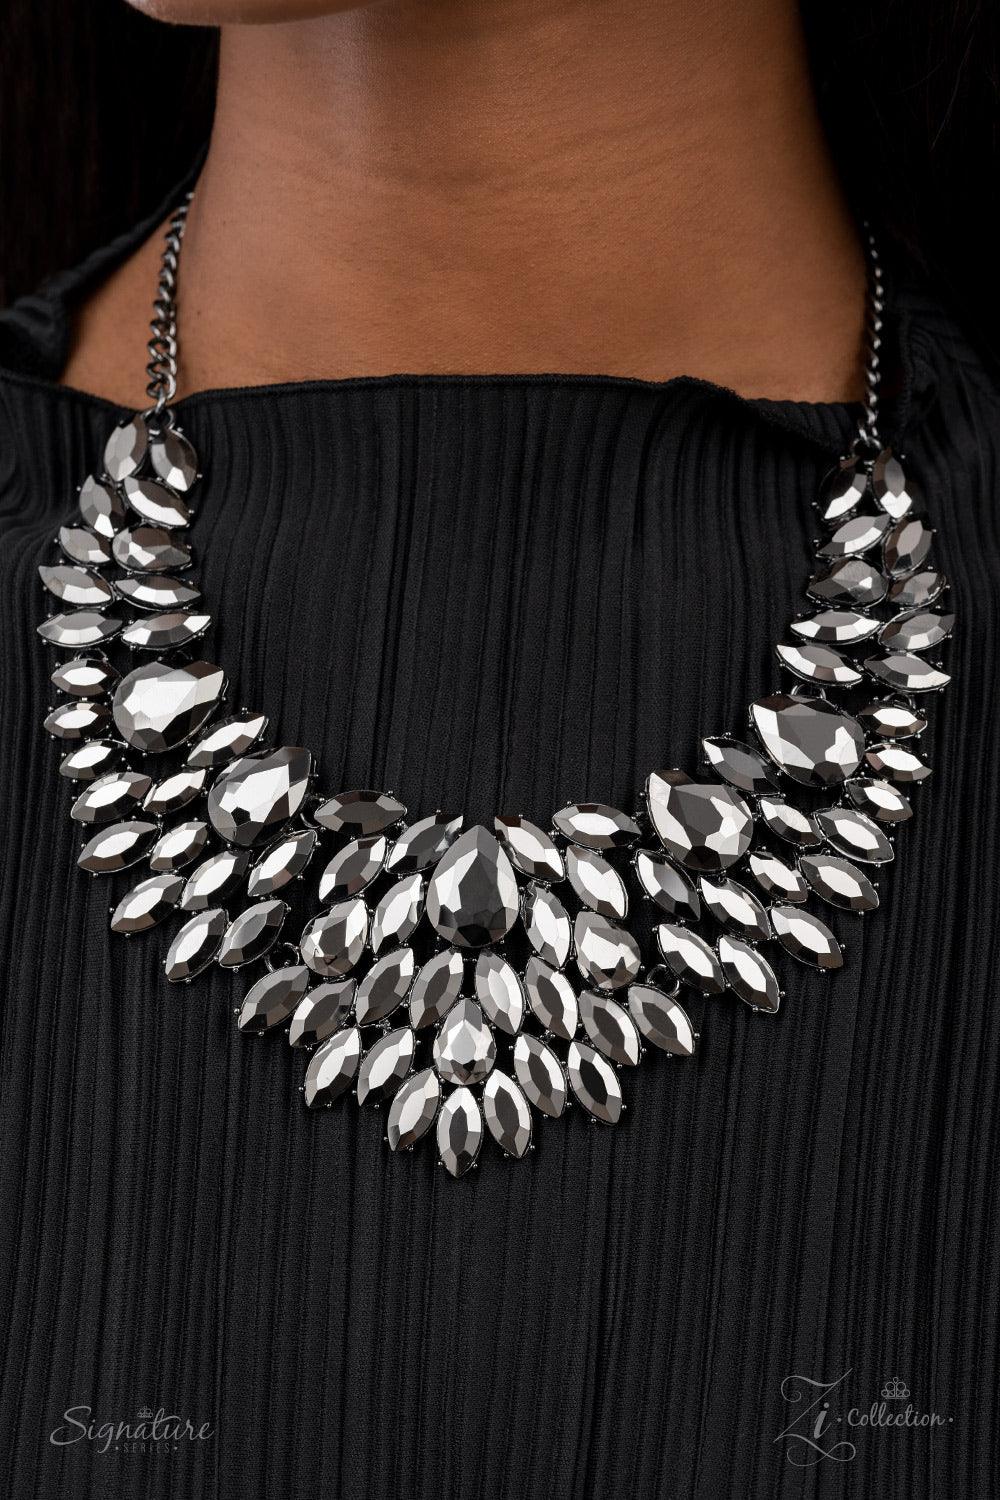 Paparazzi Accessories The Tanisha A smoldering collection of oversized teardrop and marquise cut hematite rhinestones daringly fan out from the collar, coalescing into intense interconnected frames. The dauntless display of dazzle locks in place, creating